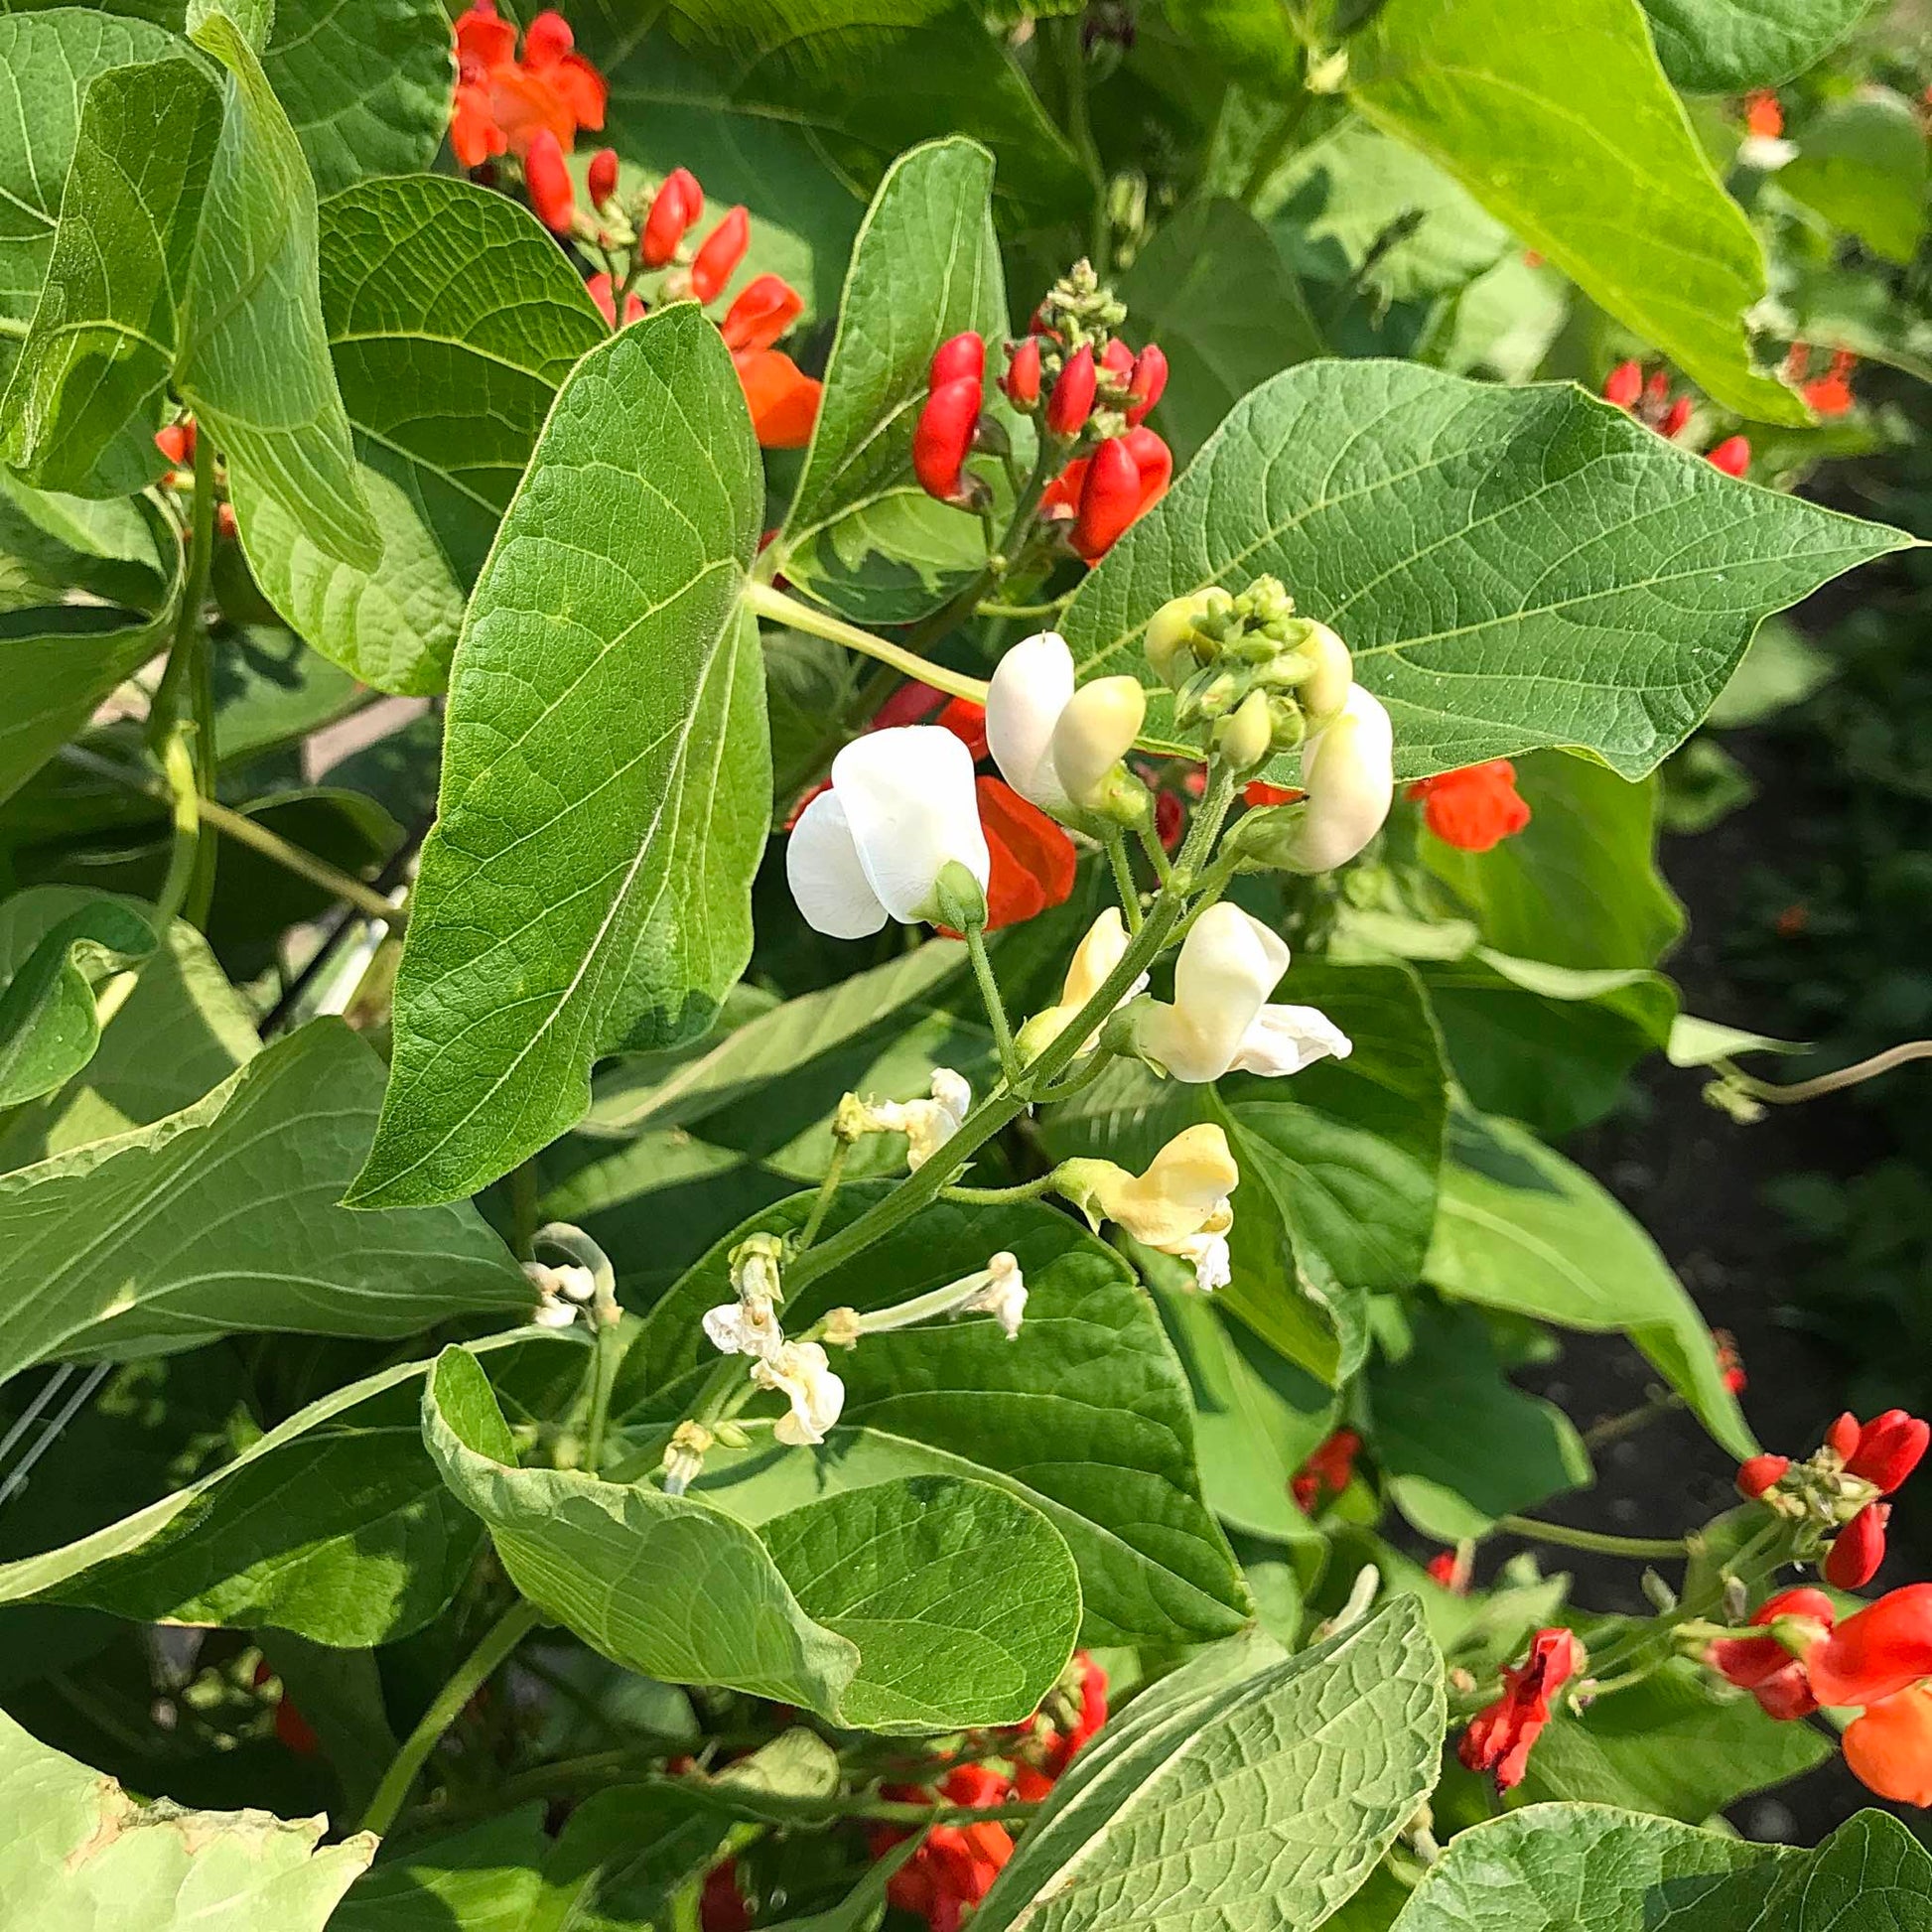 Solid red and white runner bean blossoms.